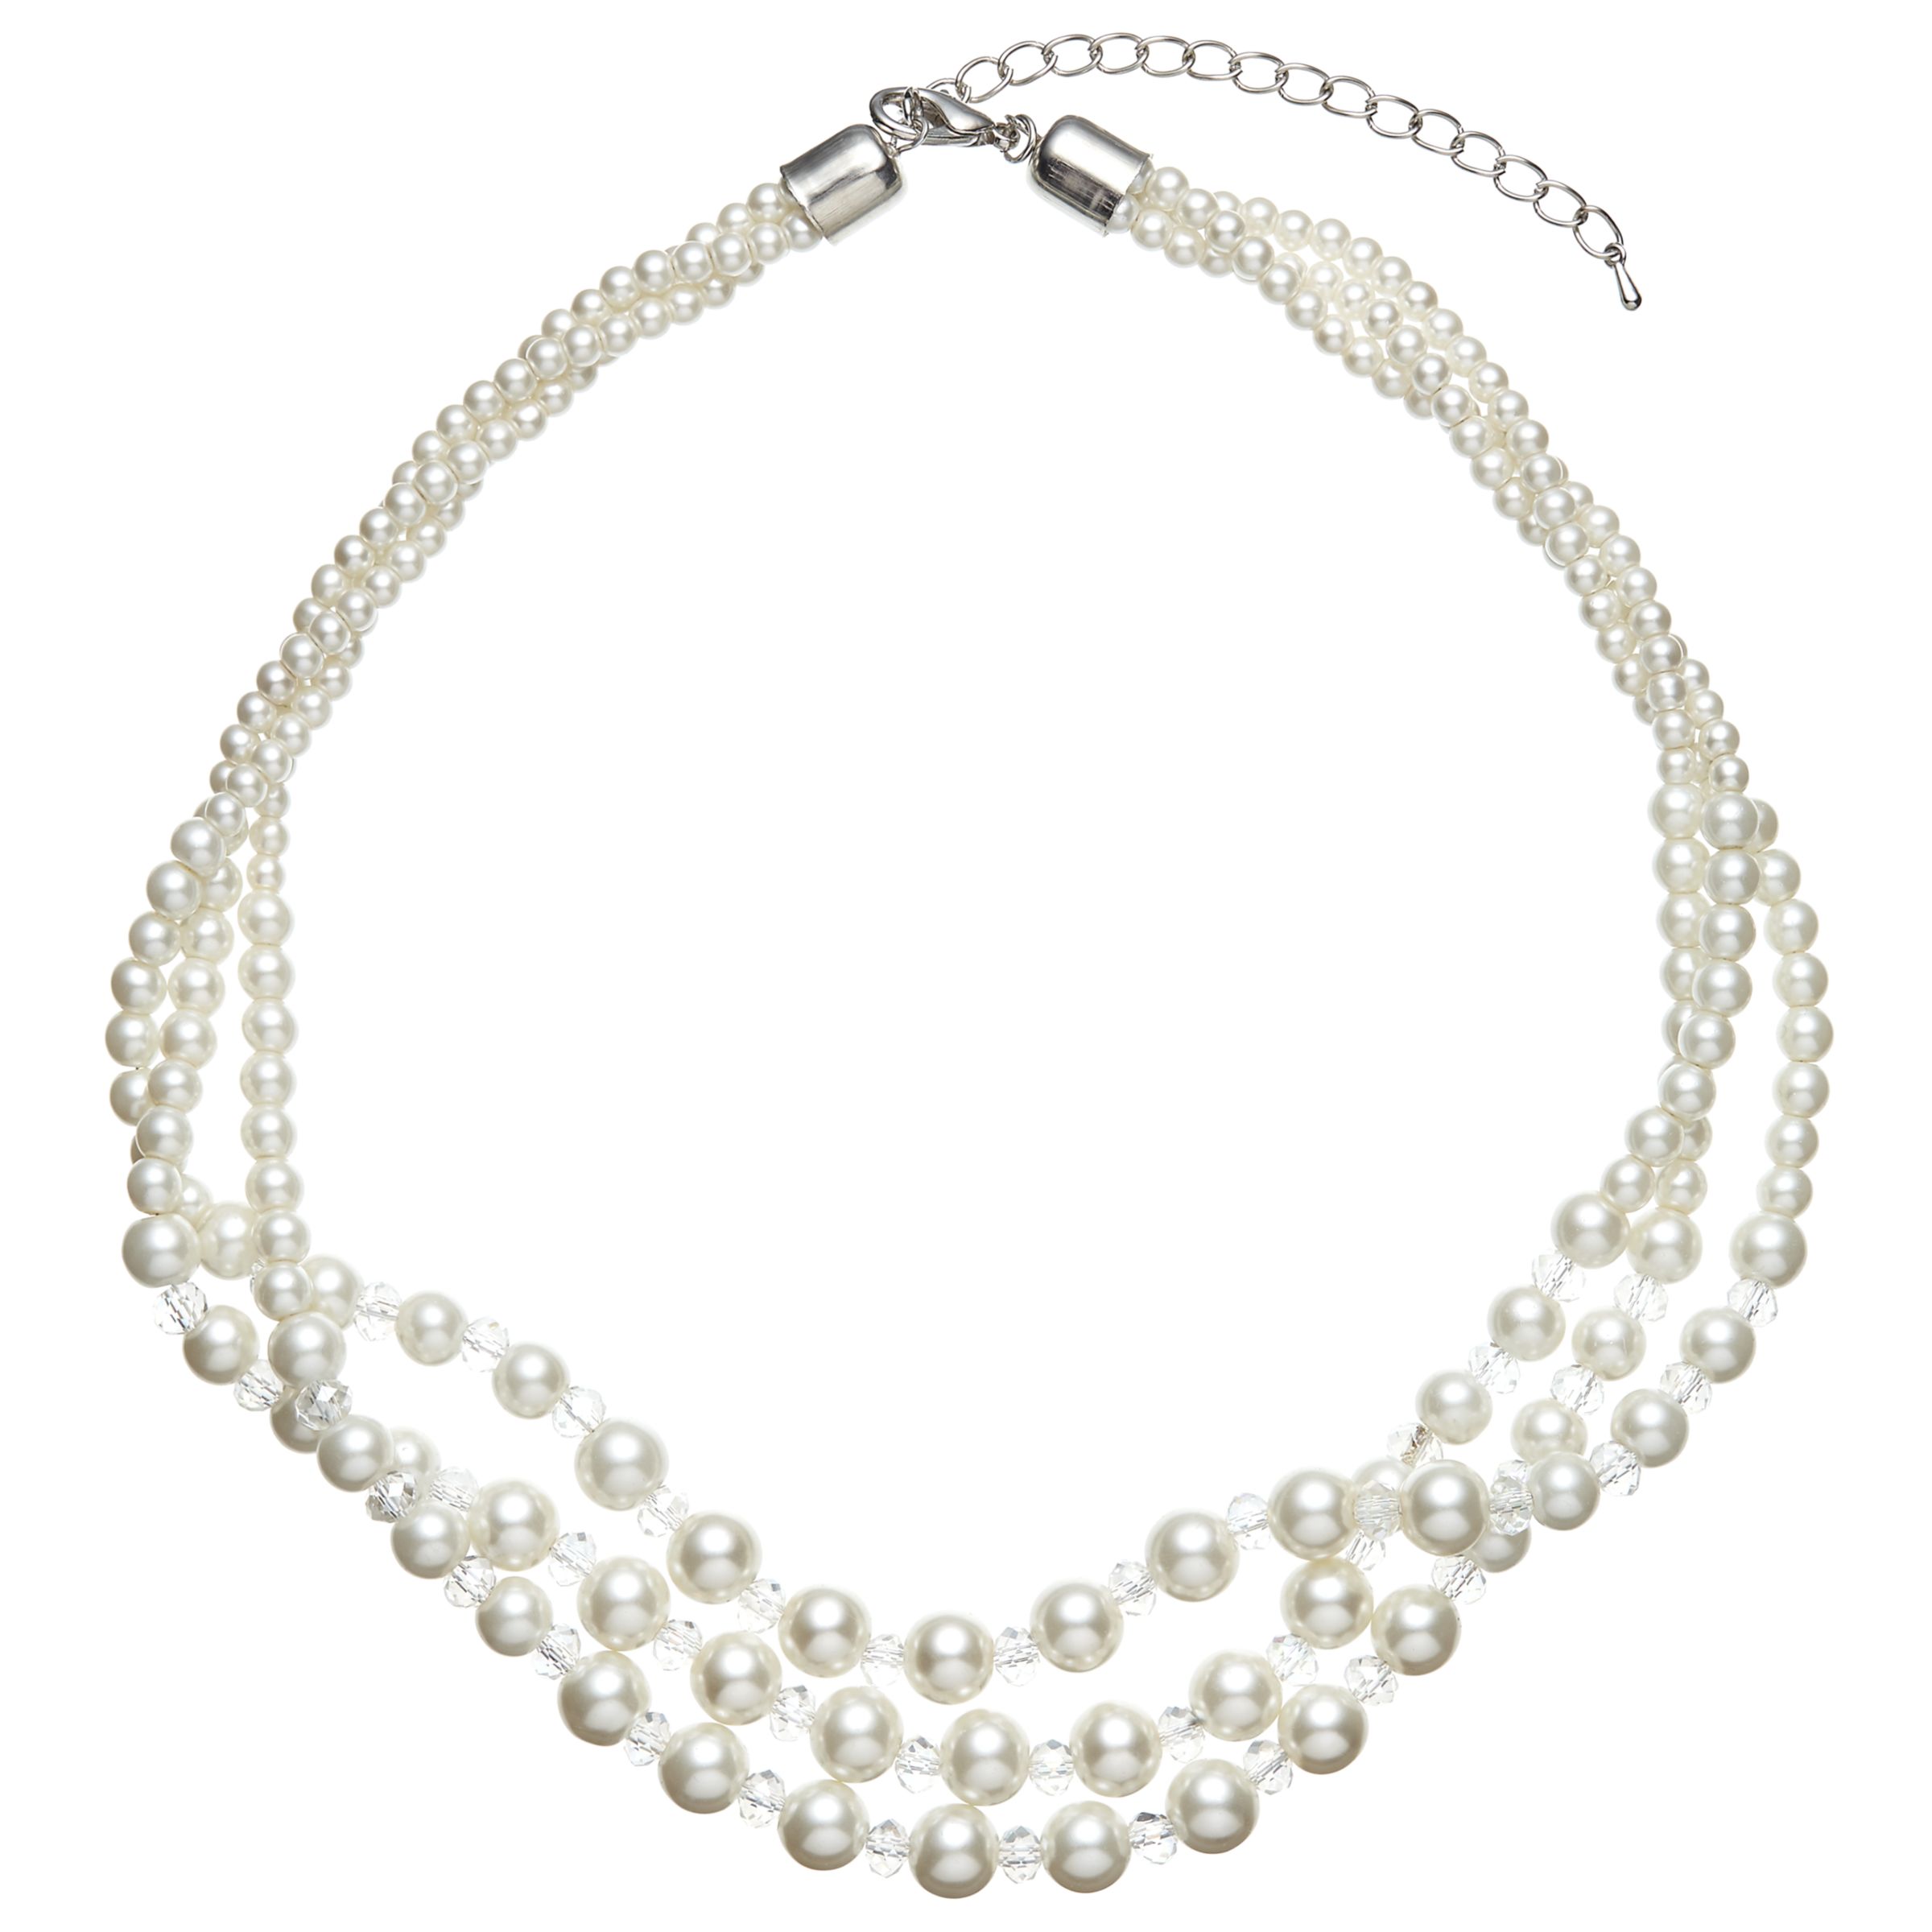 John Lewis & Partners Three Row Graduating Faux Pearl and Bead Twist Necklace, White/Clear